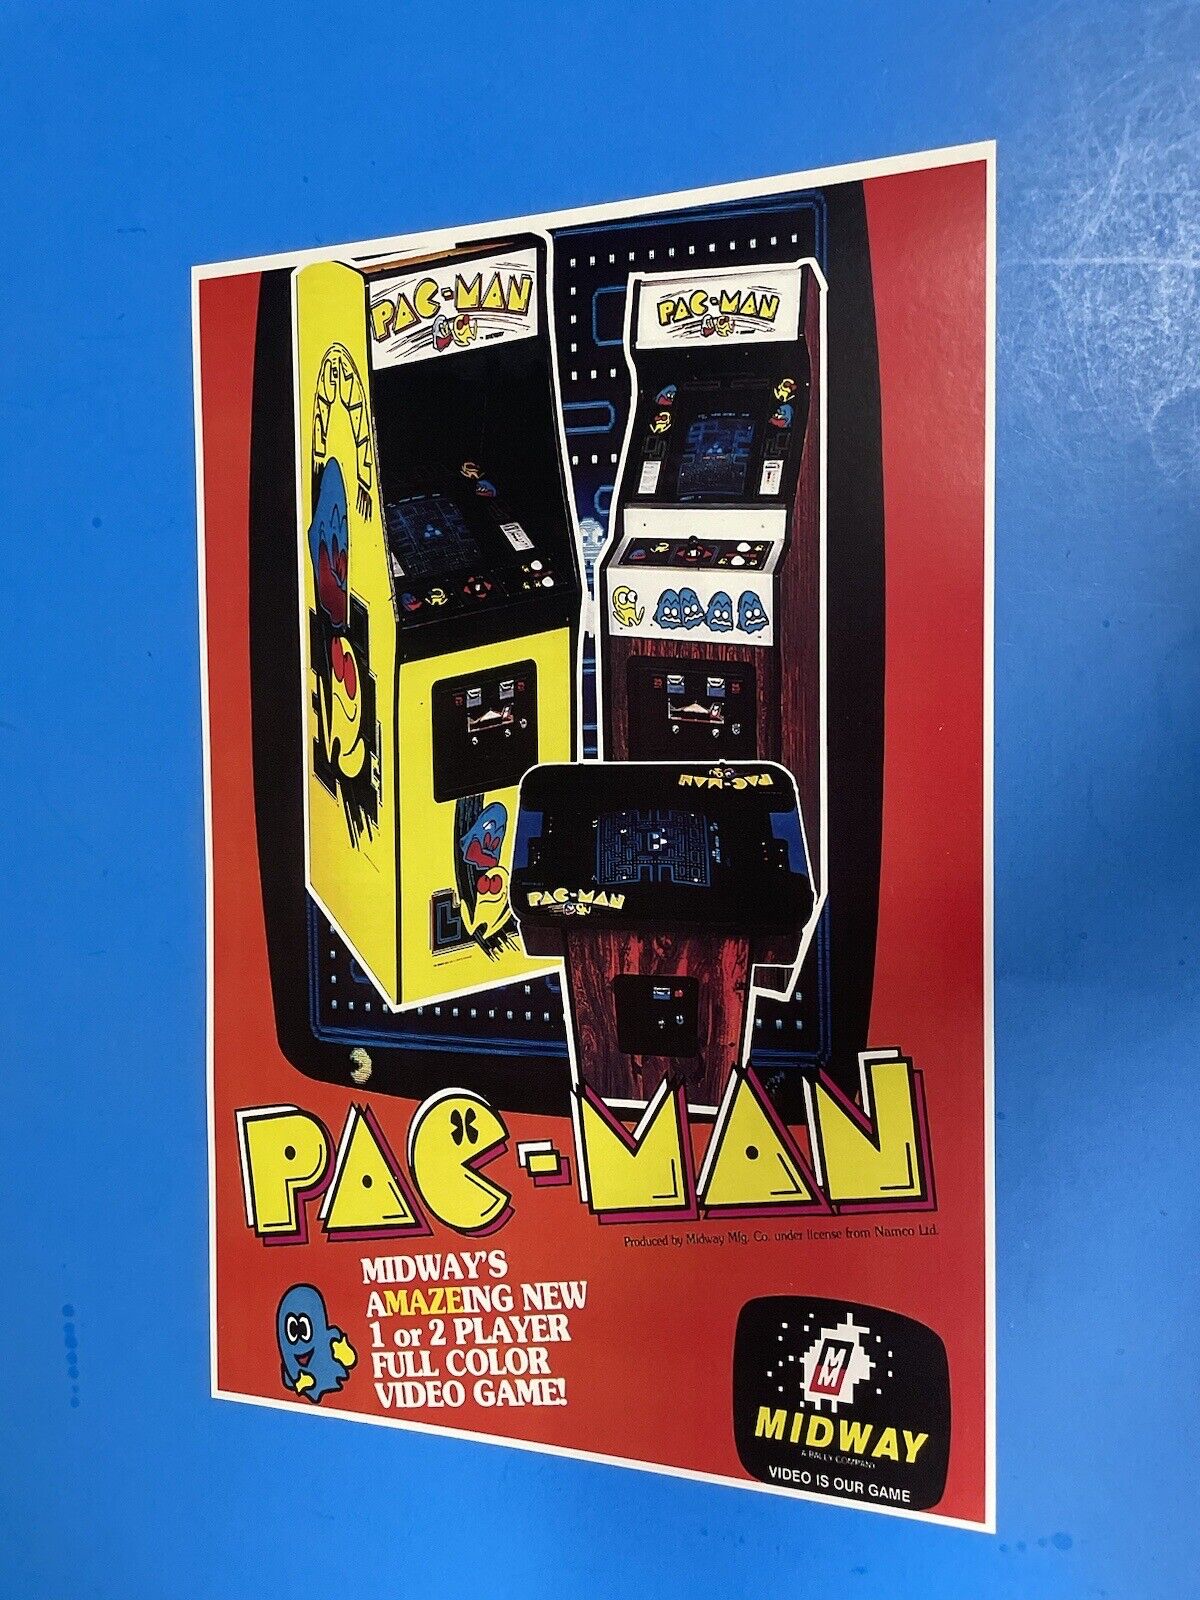 MIDWAY BALLY PAC-MAN VIDEO GAME POSTER PIN UP NEW.